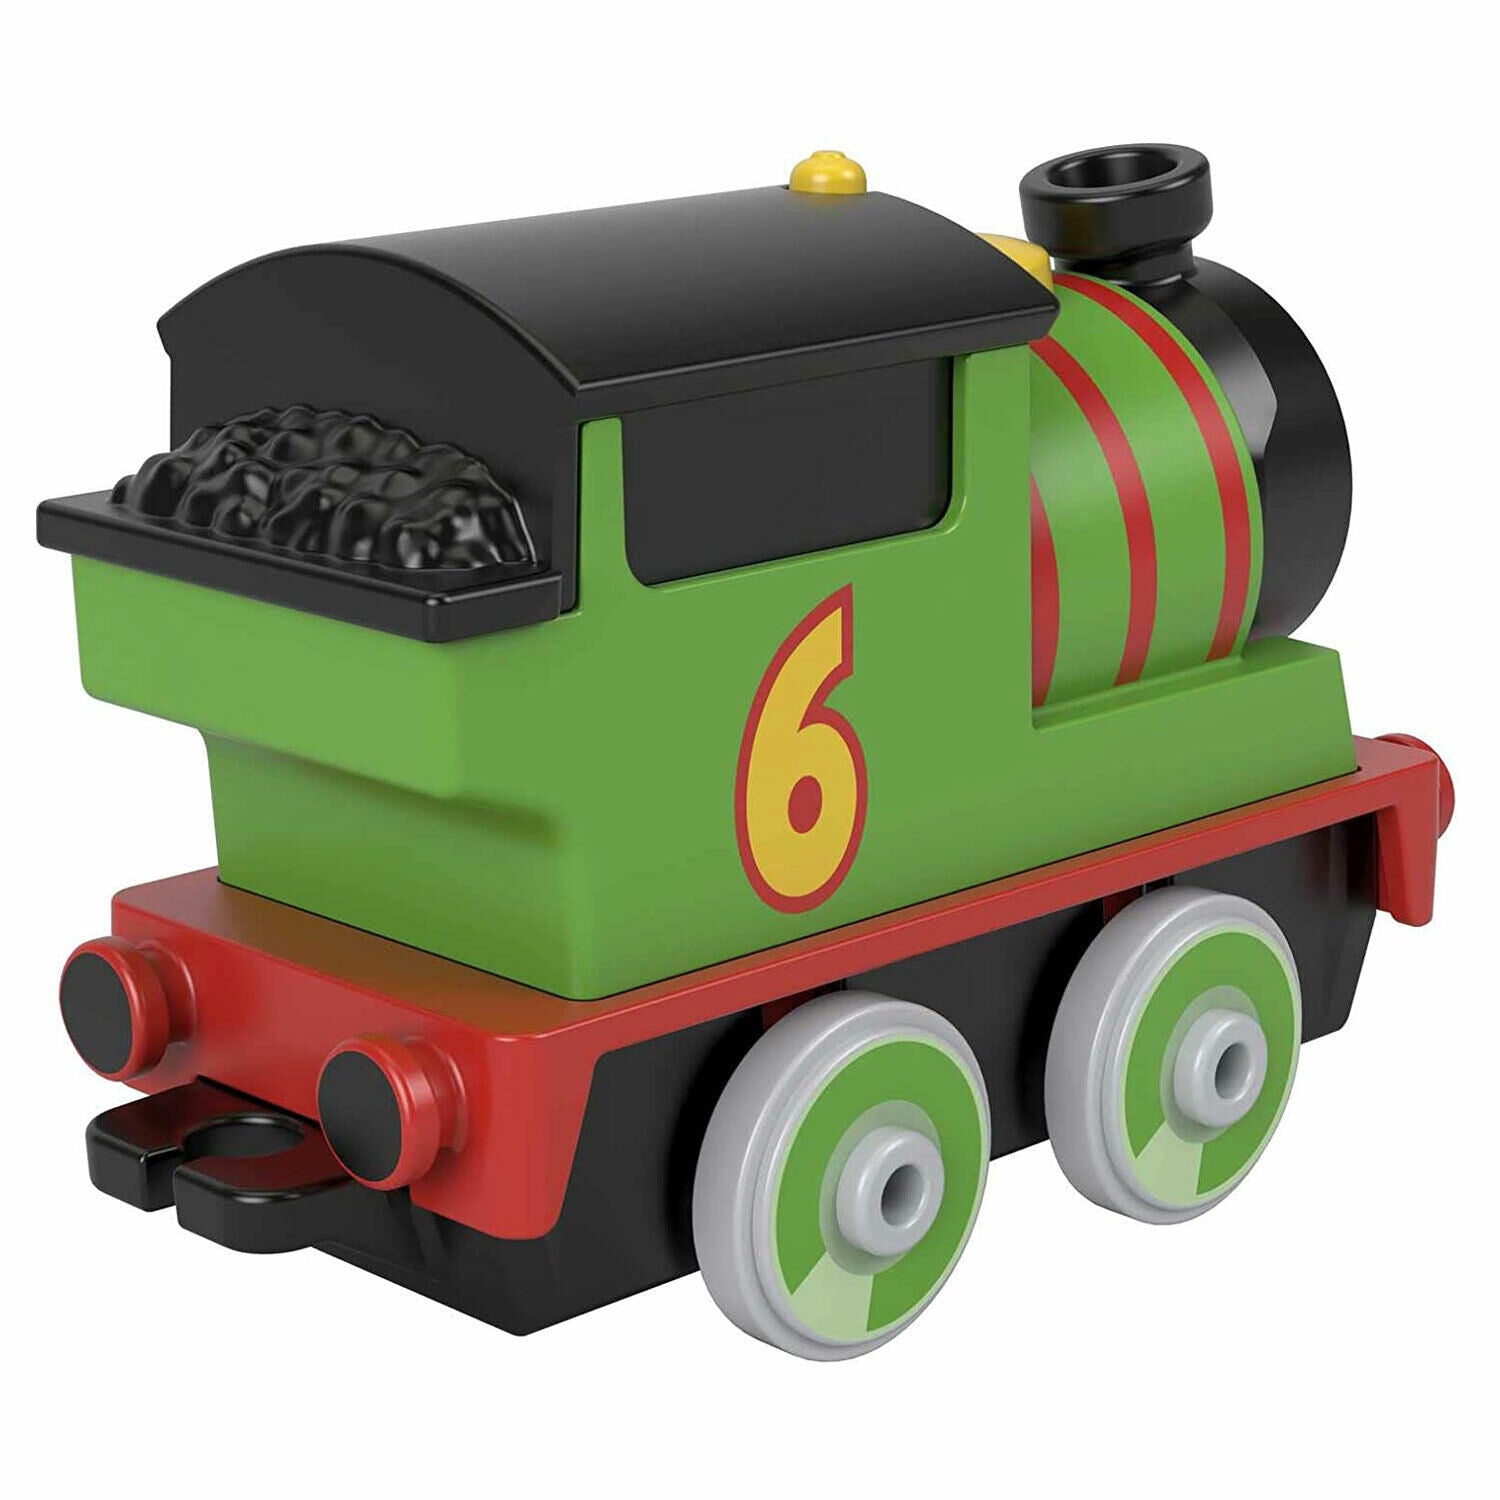 New Fisher-Price Thomas & Friends Percy Metal Engine Toy